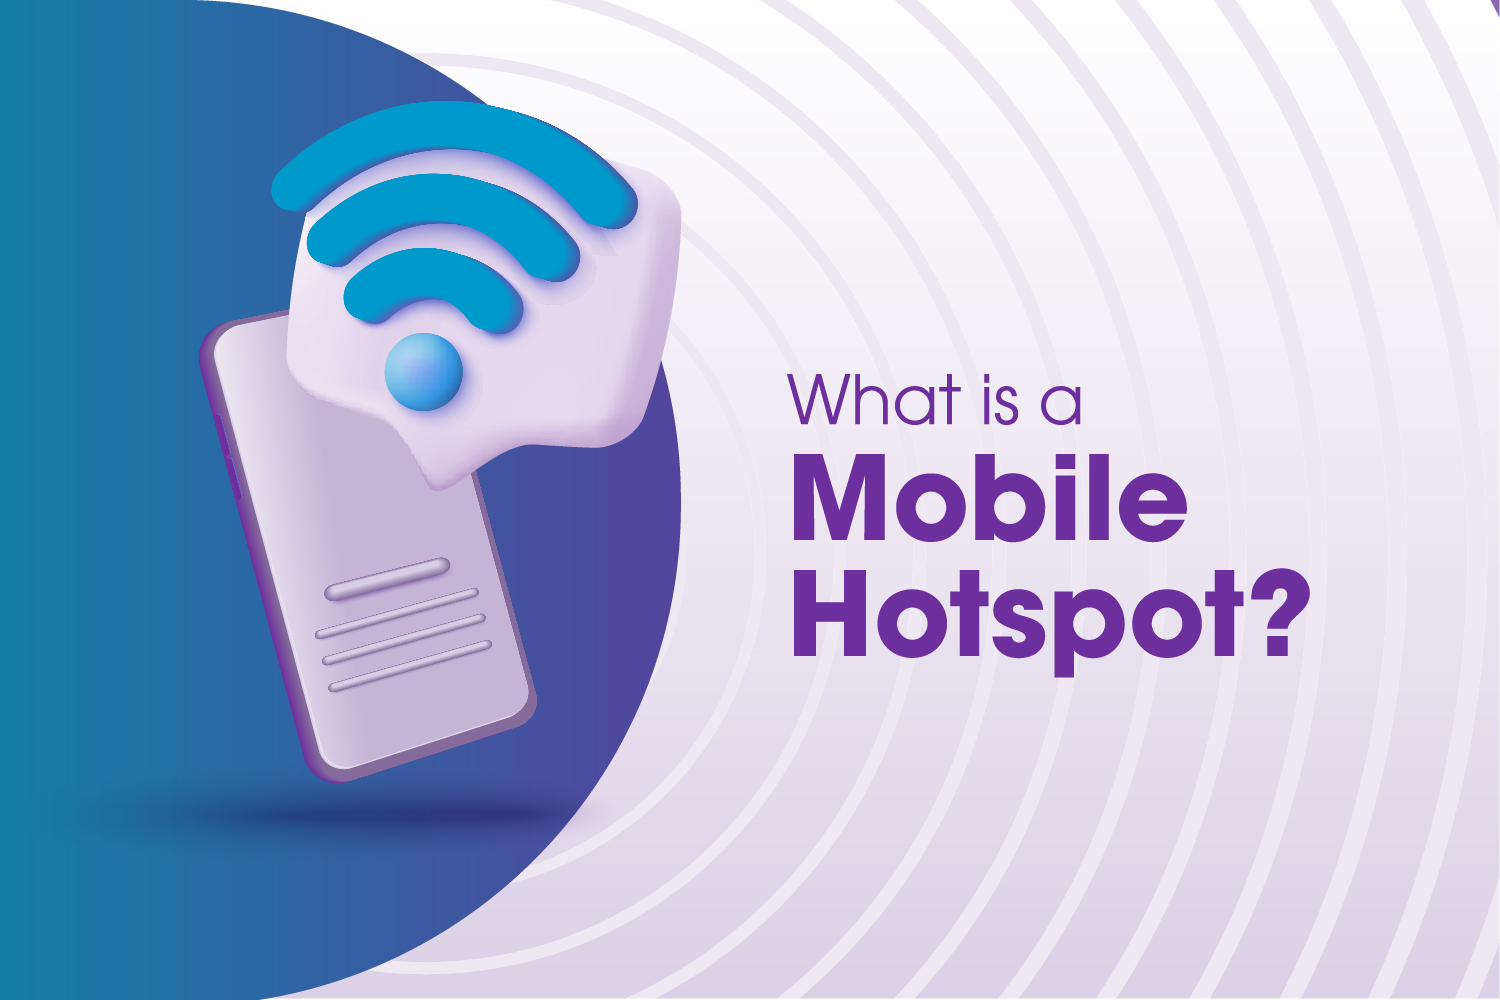 What is Mobile Hotspot